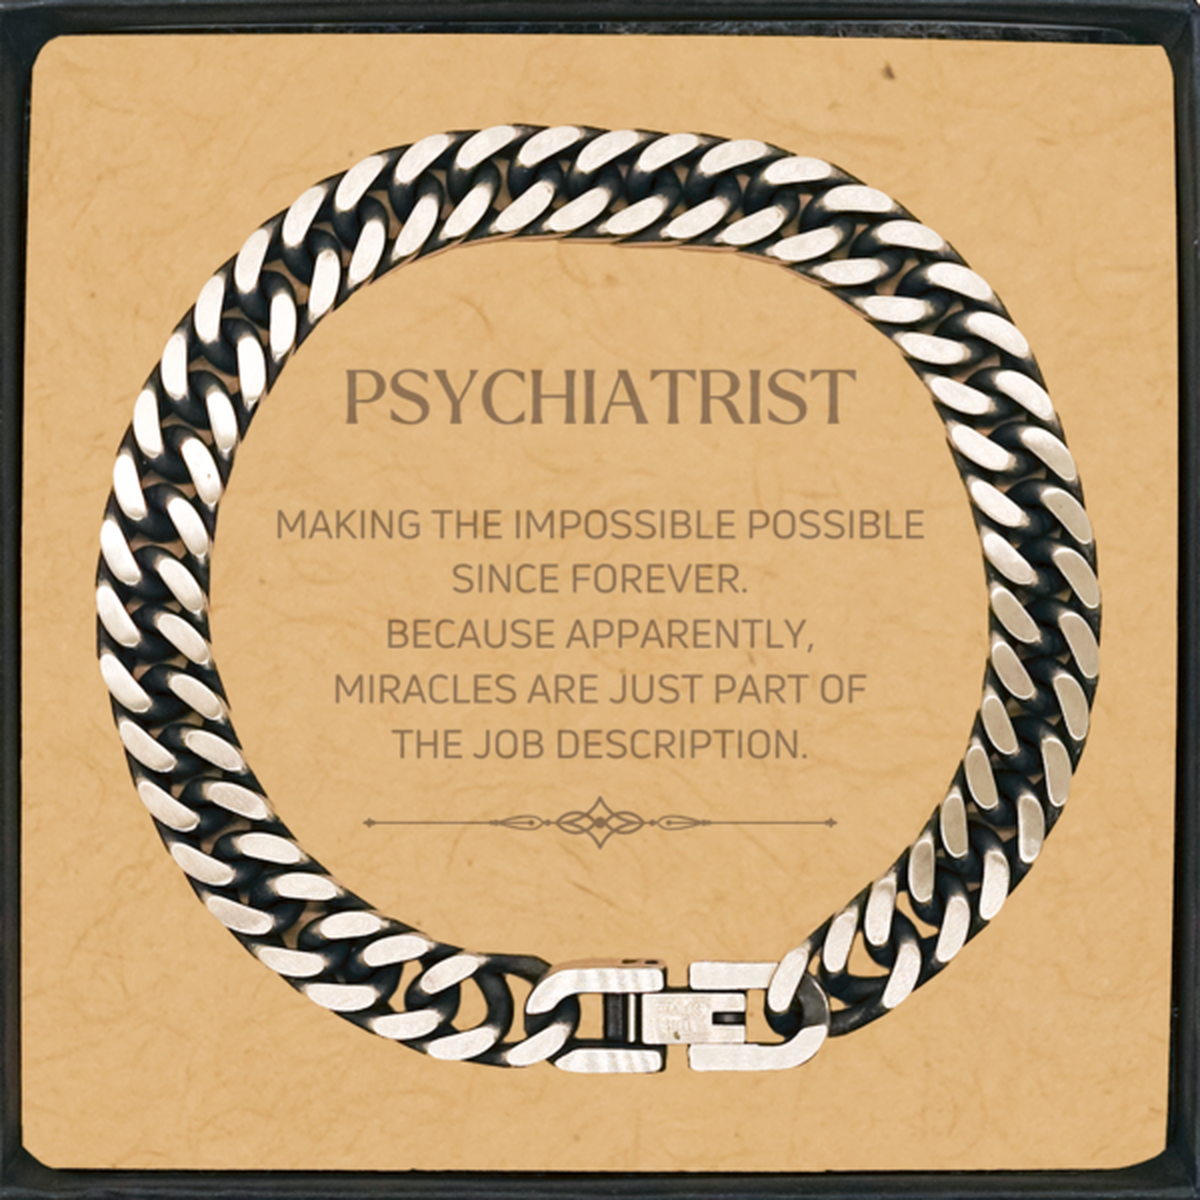 Funny Psychiatrist Gifts, Miracles are just part of the job description, Inspirational Birthday Cuban Link Chain Bracelet For Psychiatrist, Men, Women, Coworkers, Friends, Boss